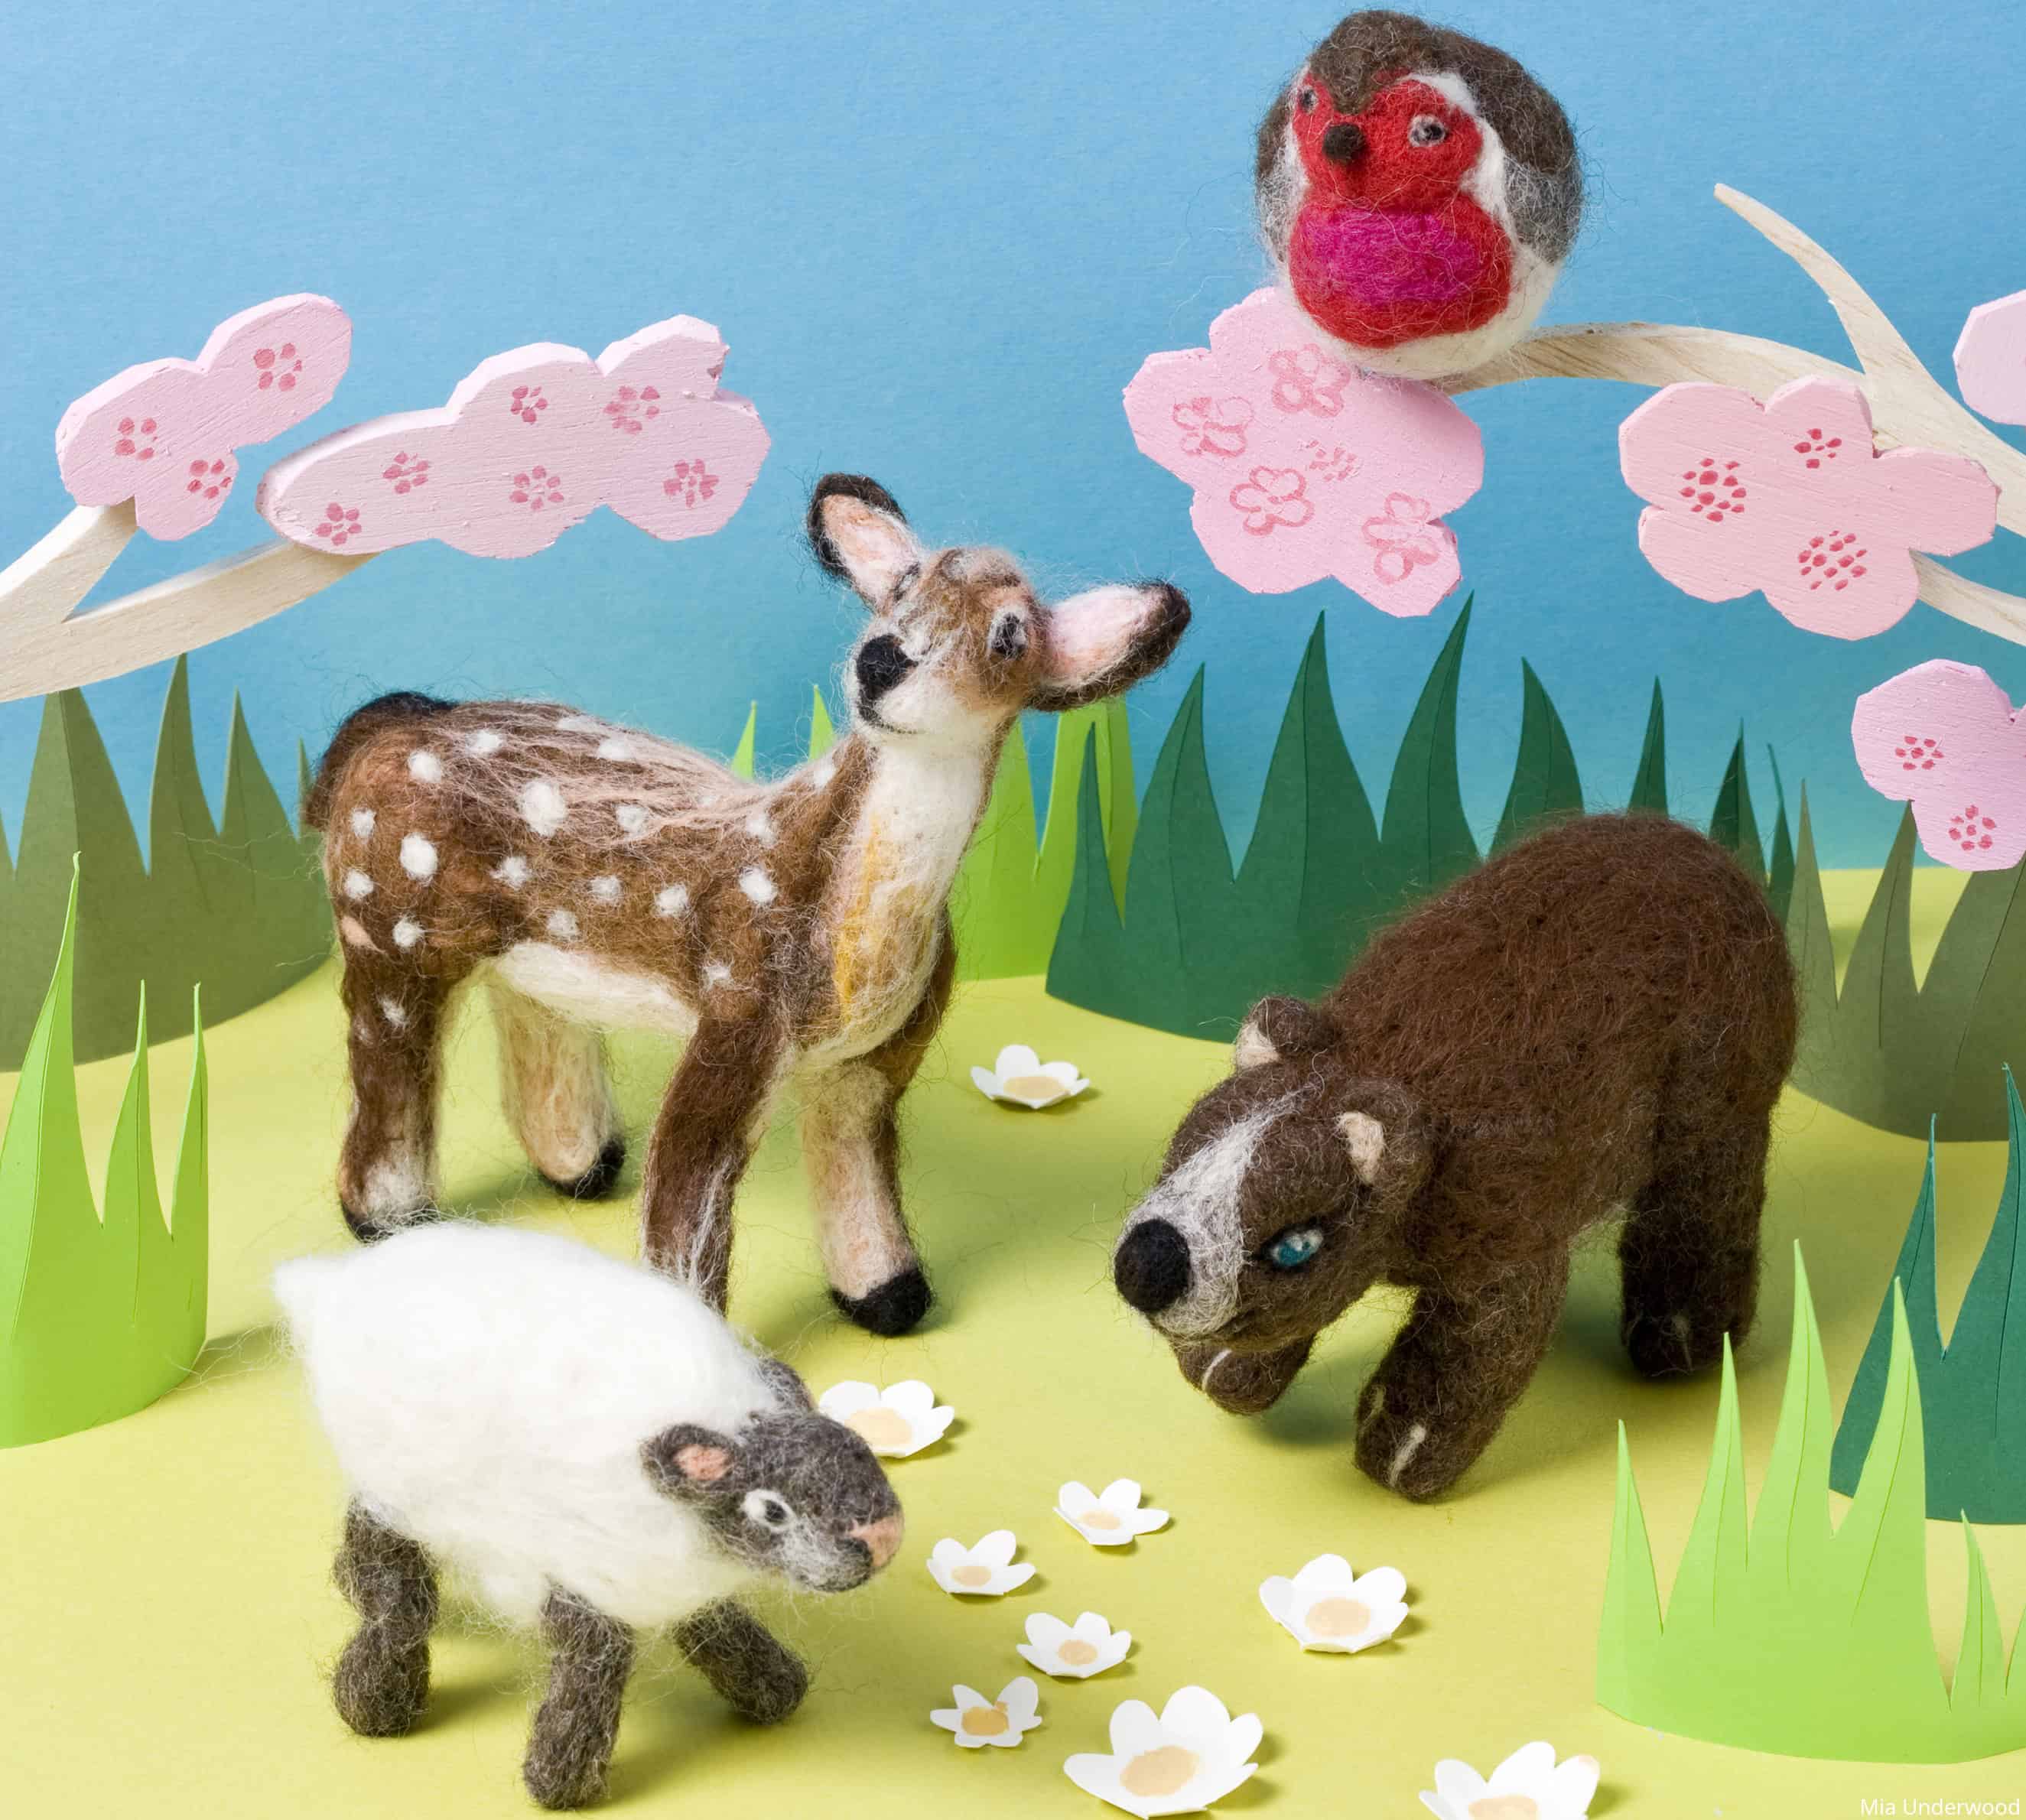 A garden scene with needle felted 3D models of a deer, a sheep, a bear and a robin